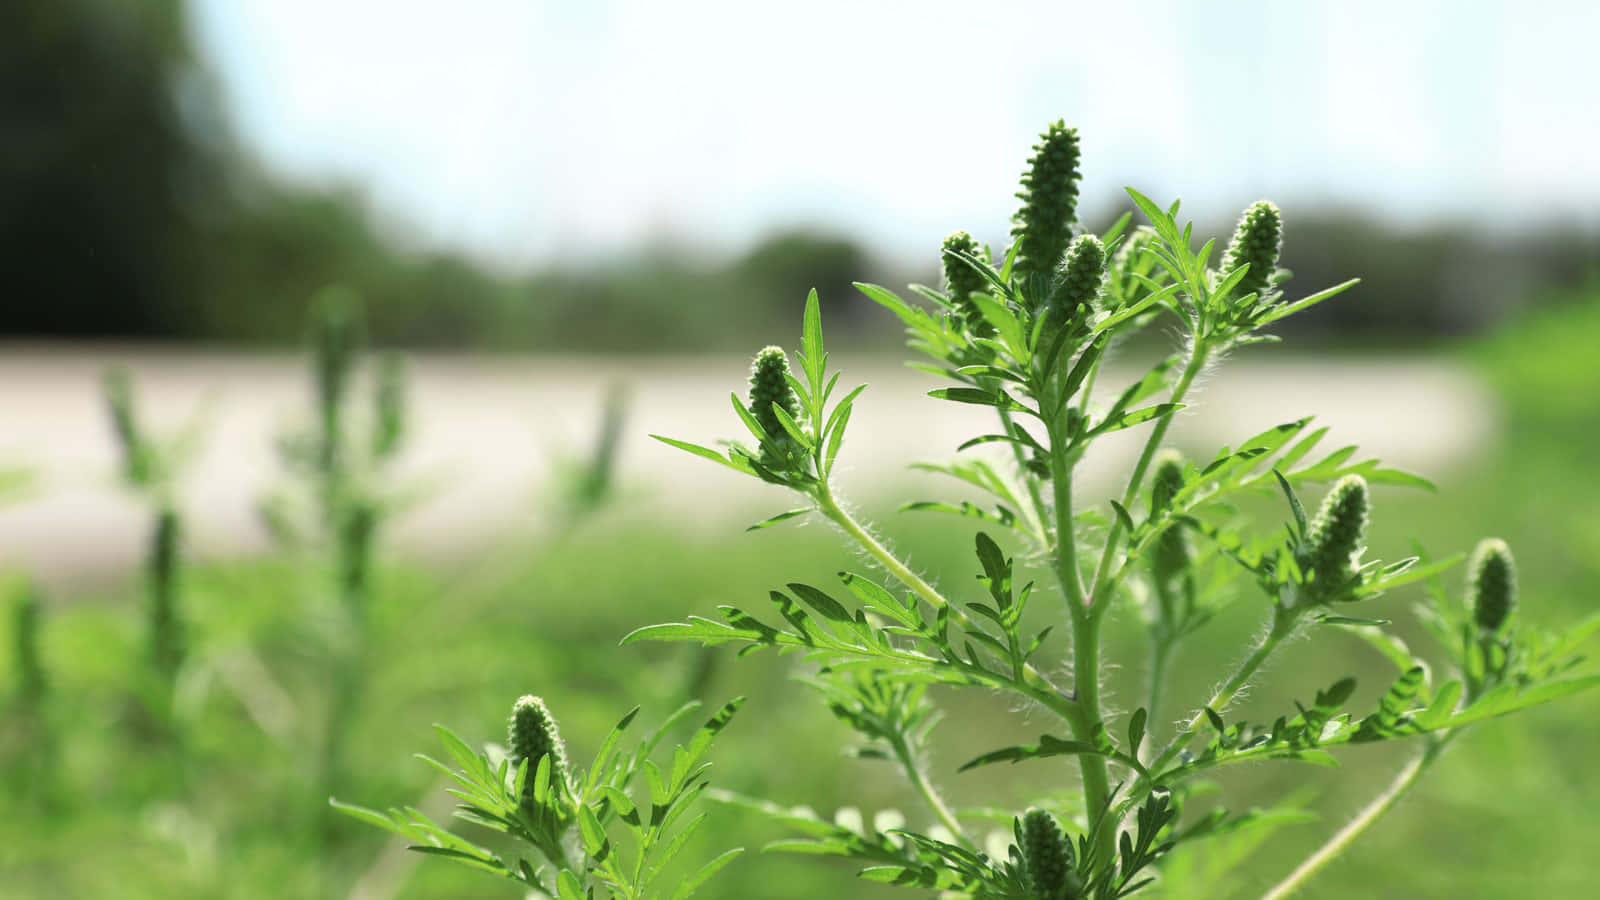 A Pollen-Filled Field of Ragweed